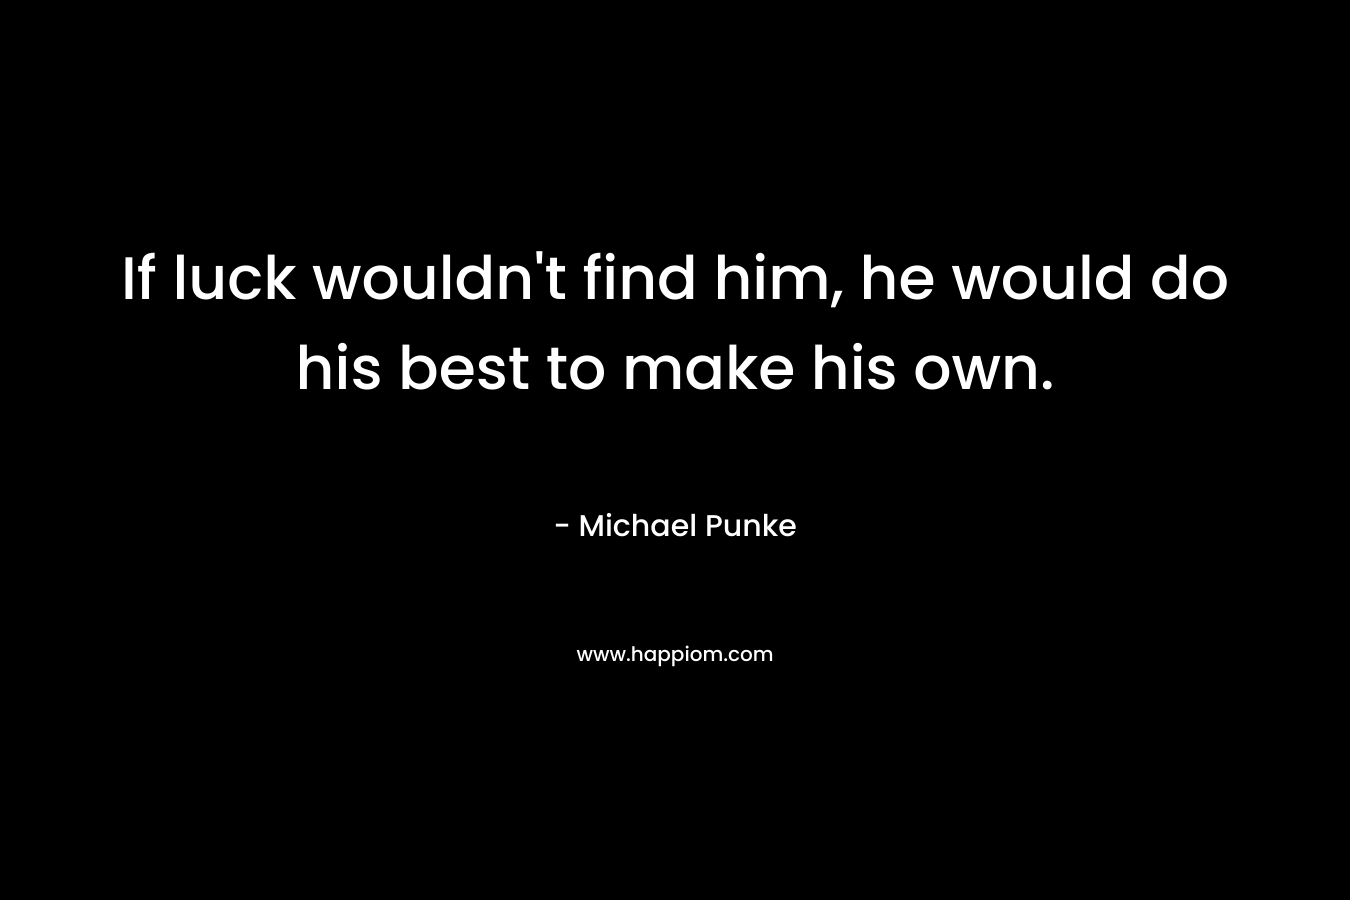 If luck wouldn’t find him, he would do his best to make his own. – Michael Punke